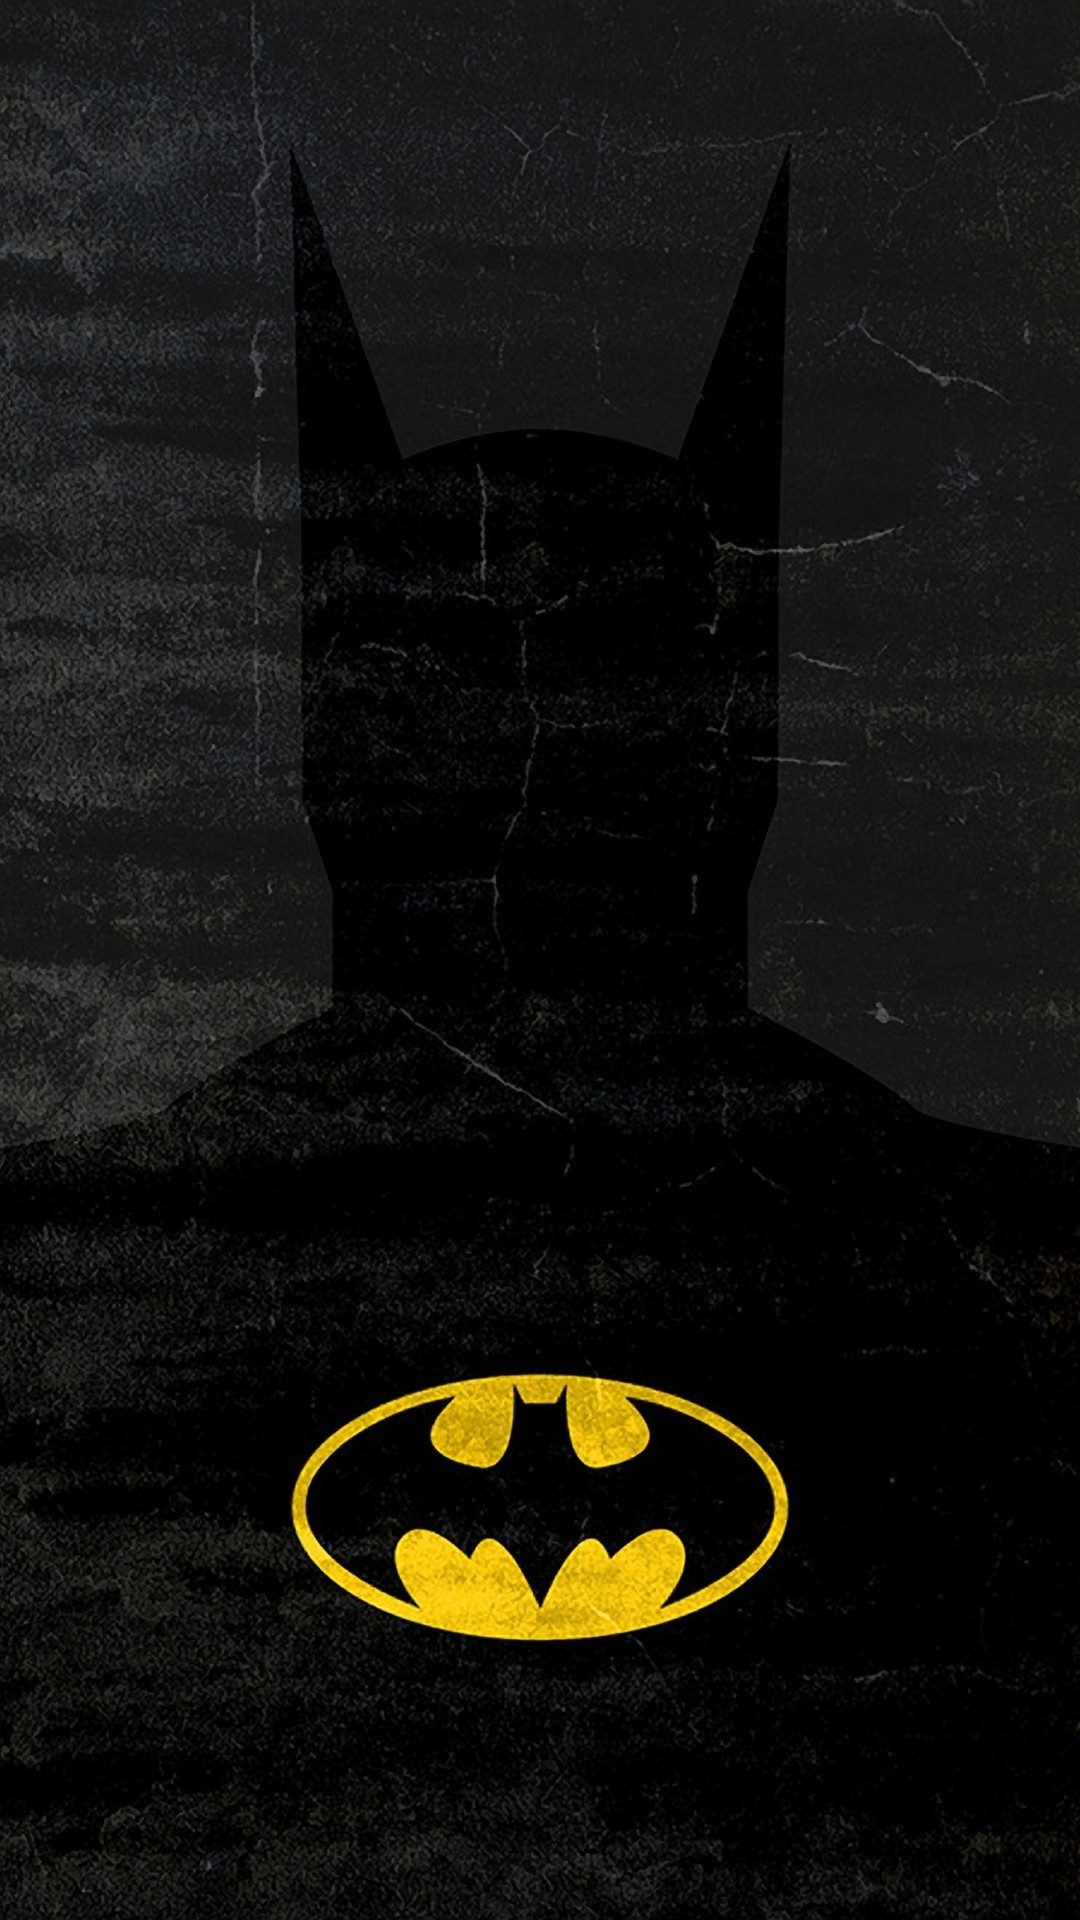 1080x1920 Collection of Batman Wallpaper Android on HDWallpapers